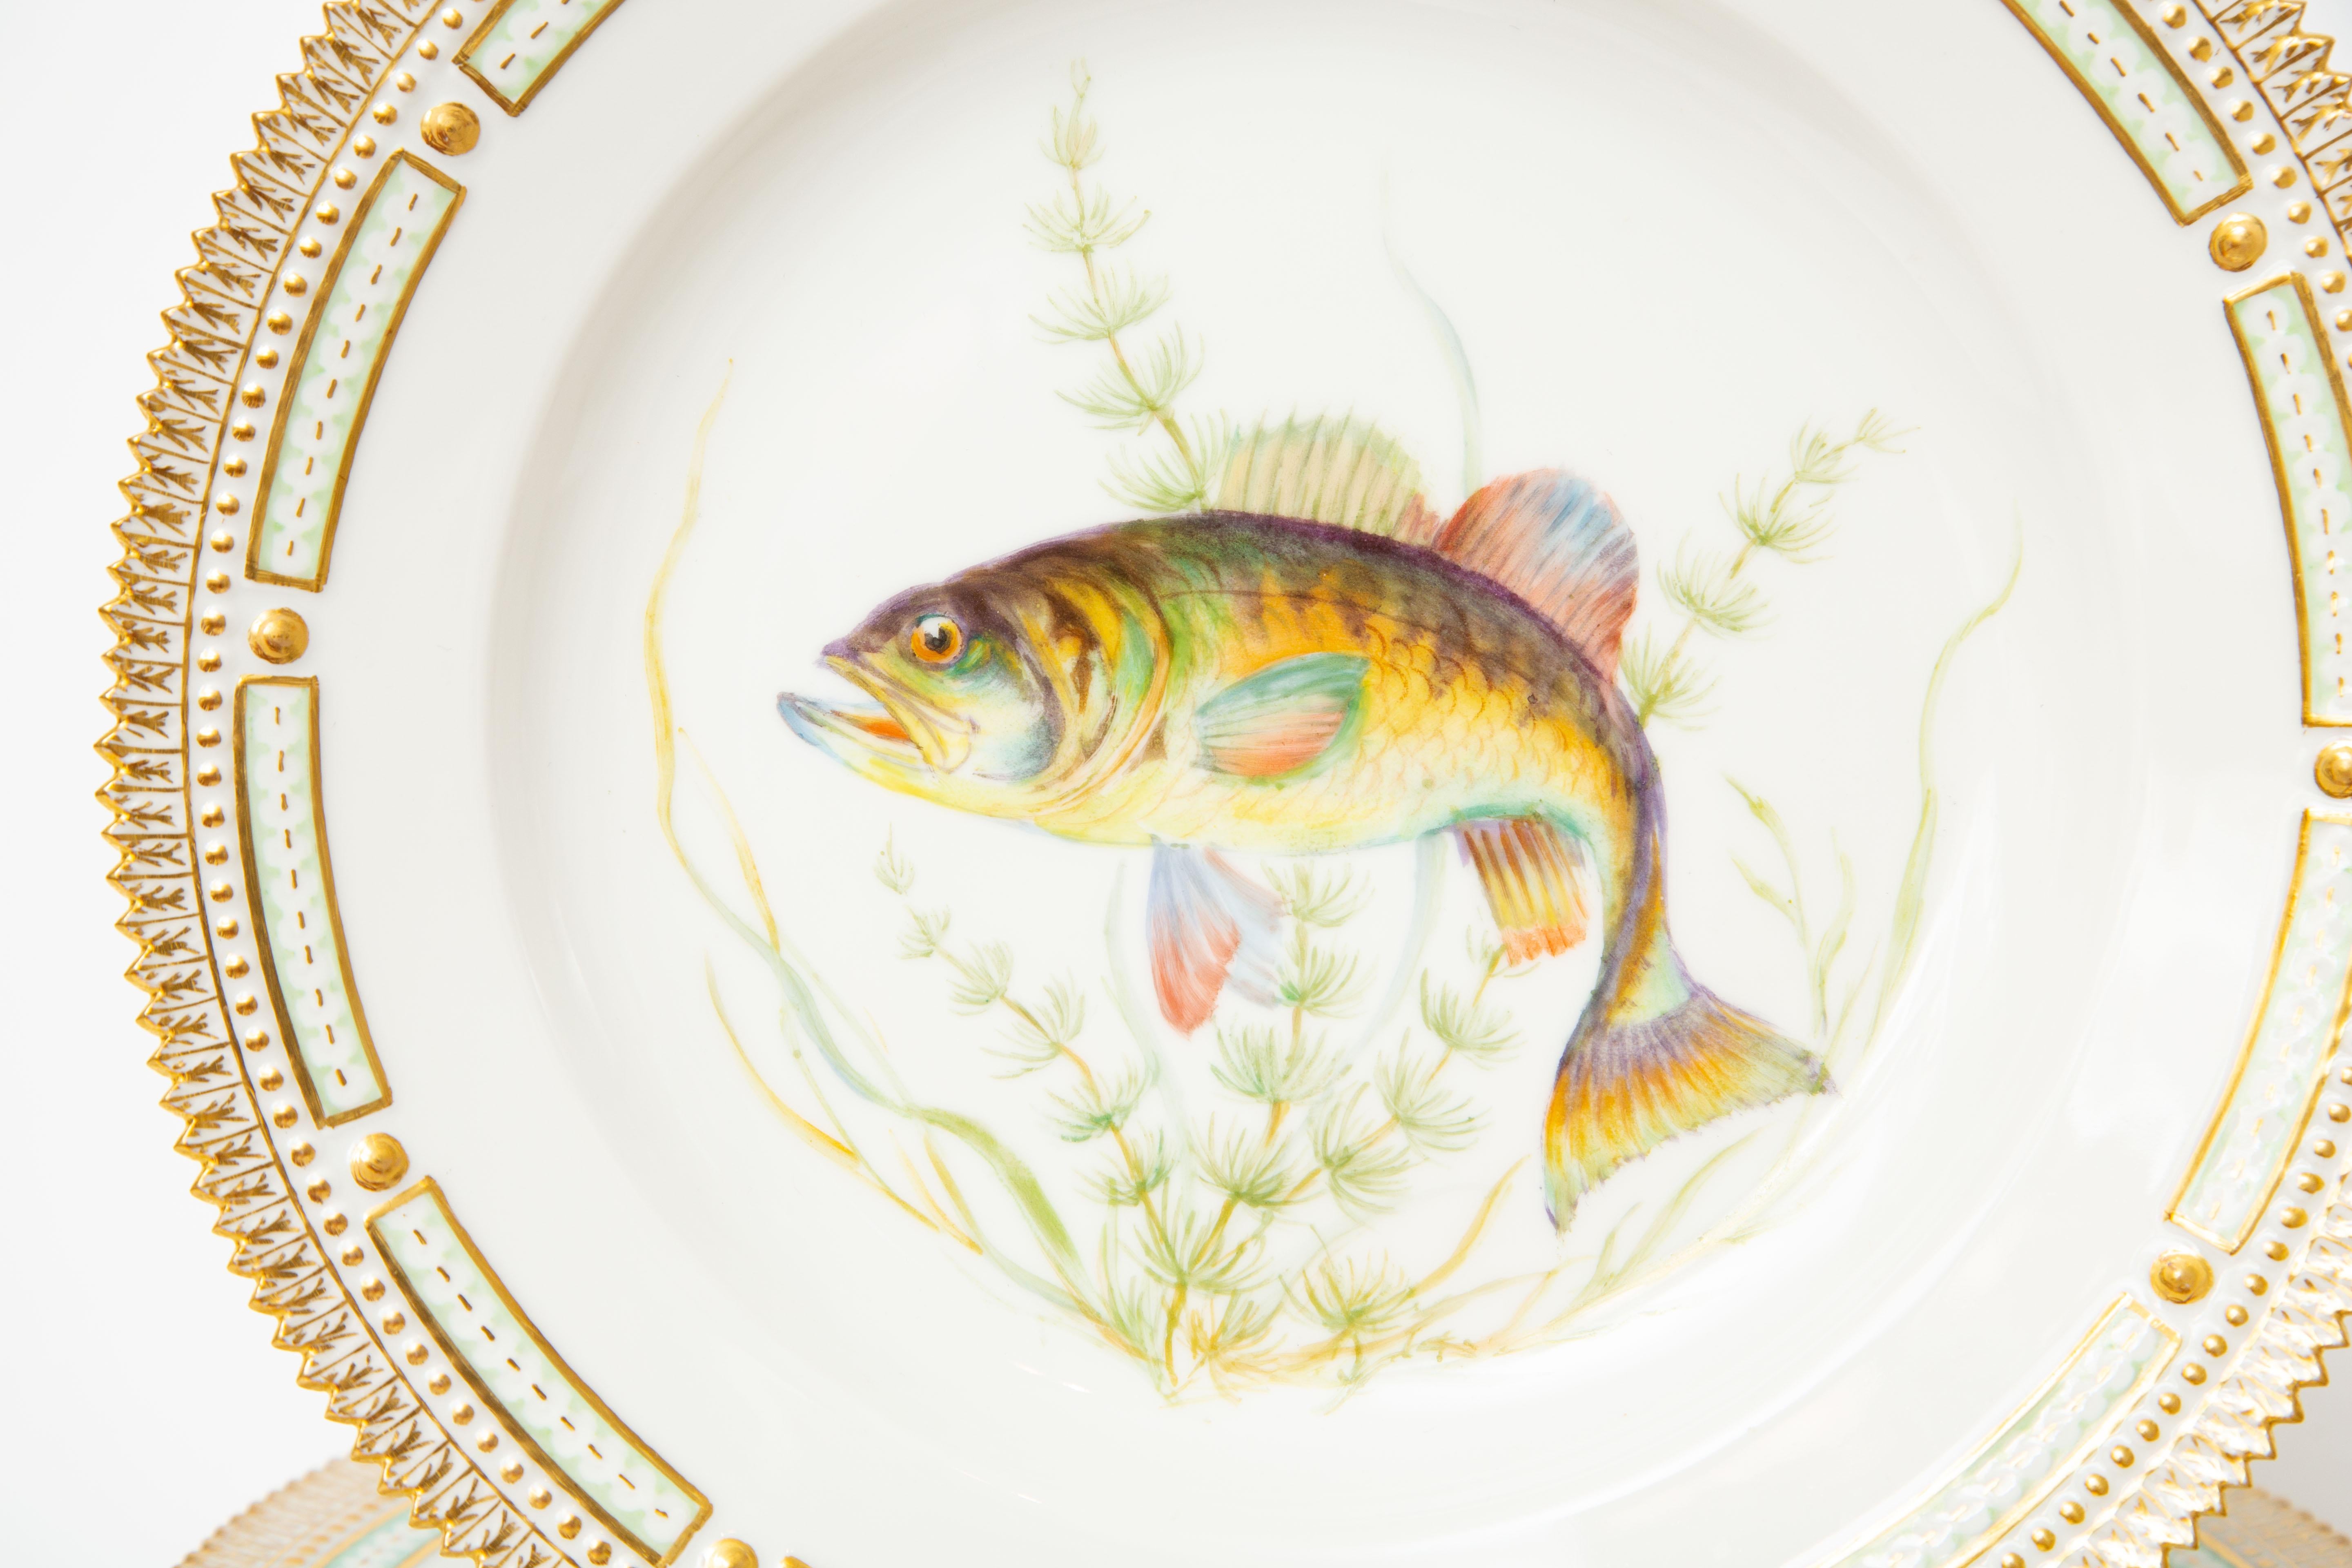 From Denmark's prestigious collection and one of the world's most re known patterns we have for sale a set of 12 generous sized plates featuring 